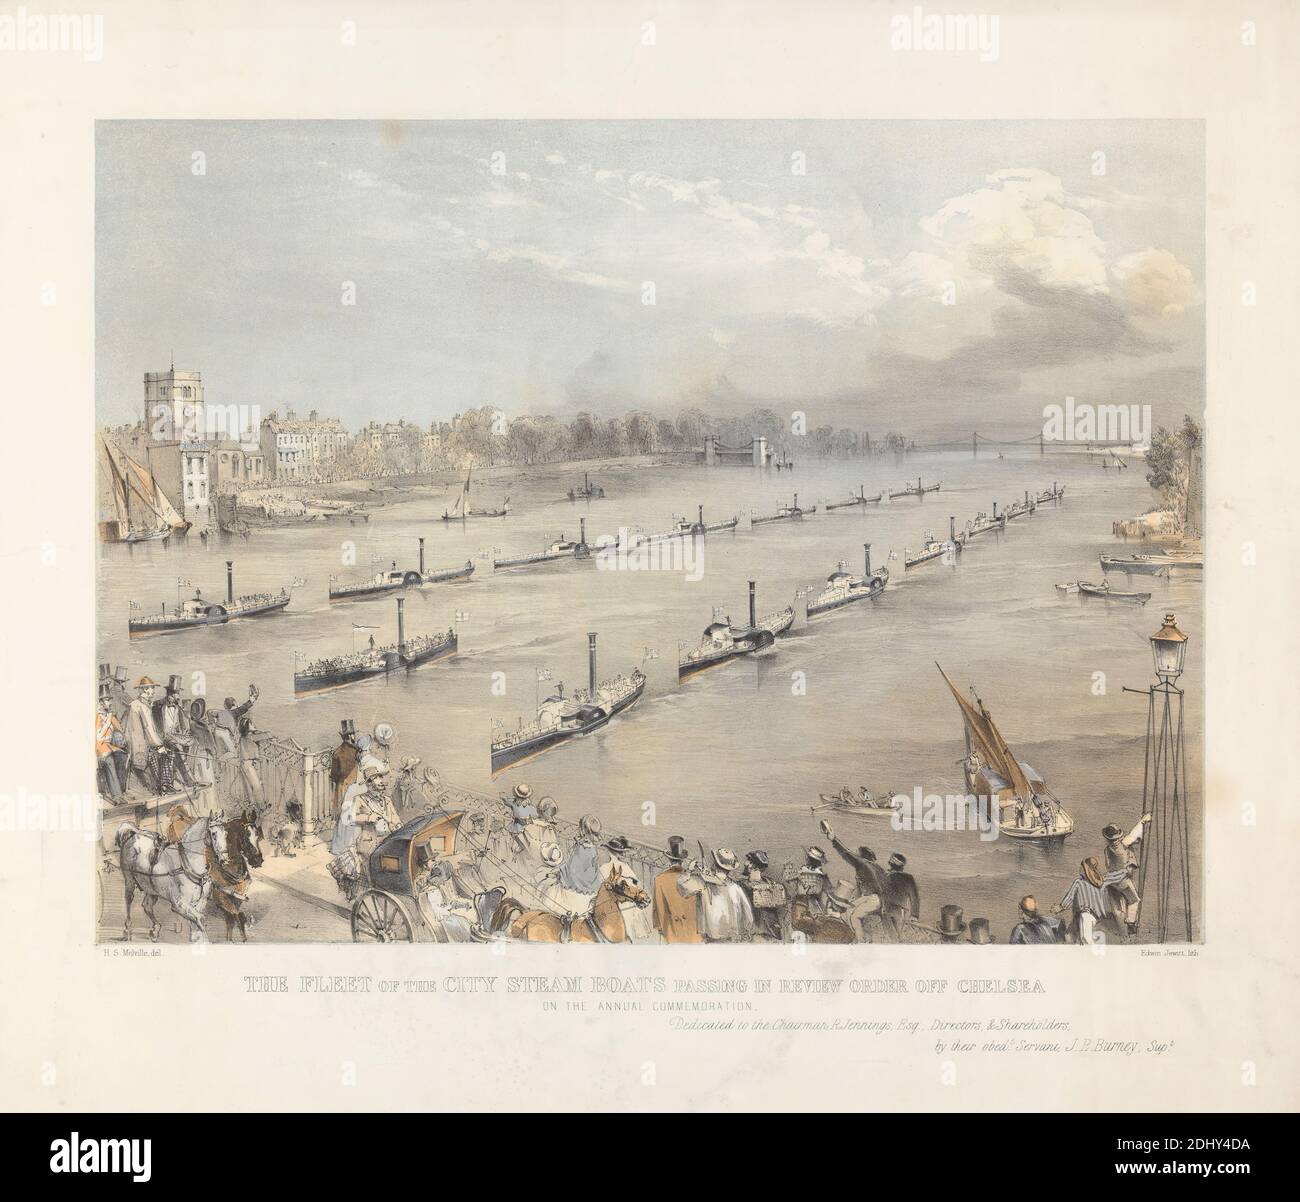 The Fleet of the City Steam Boats Passing in Review Order off Chalsea on the London Annual Commemoration, Edwin Jewitt, active 1855, after Harden S. Melville, active 1837–1882, c. 1850, Hand-colored tinted lithograph Stock Photo